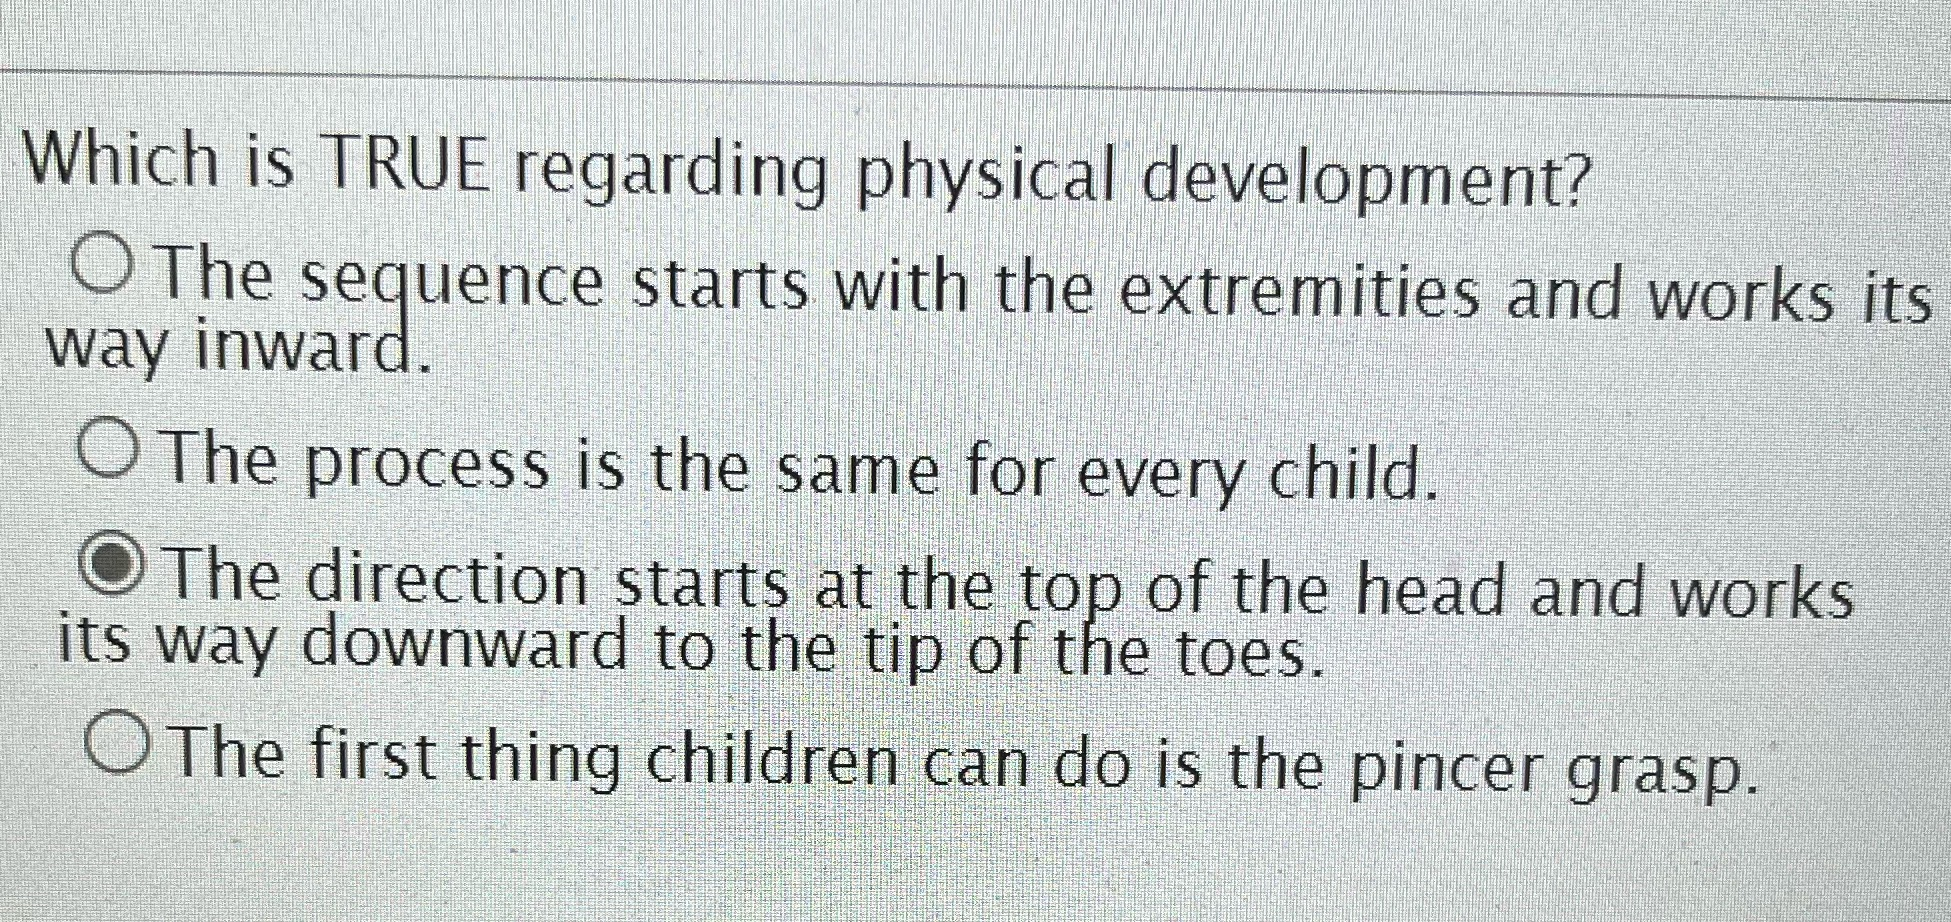 Which is TRUE regarding physical development? O The sequence starts with the extremities and works its way